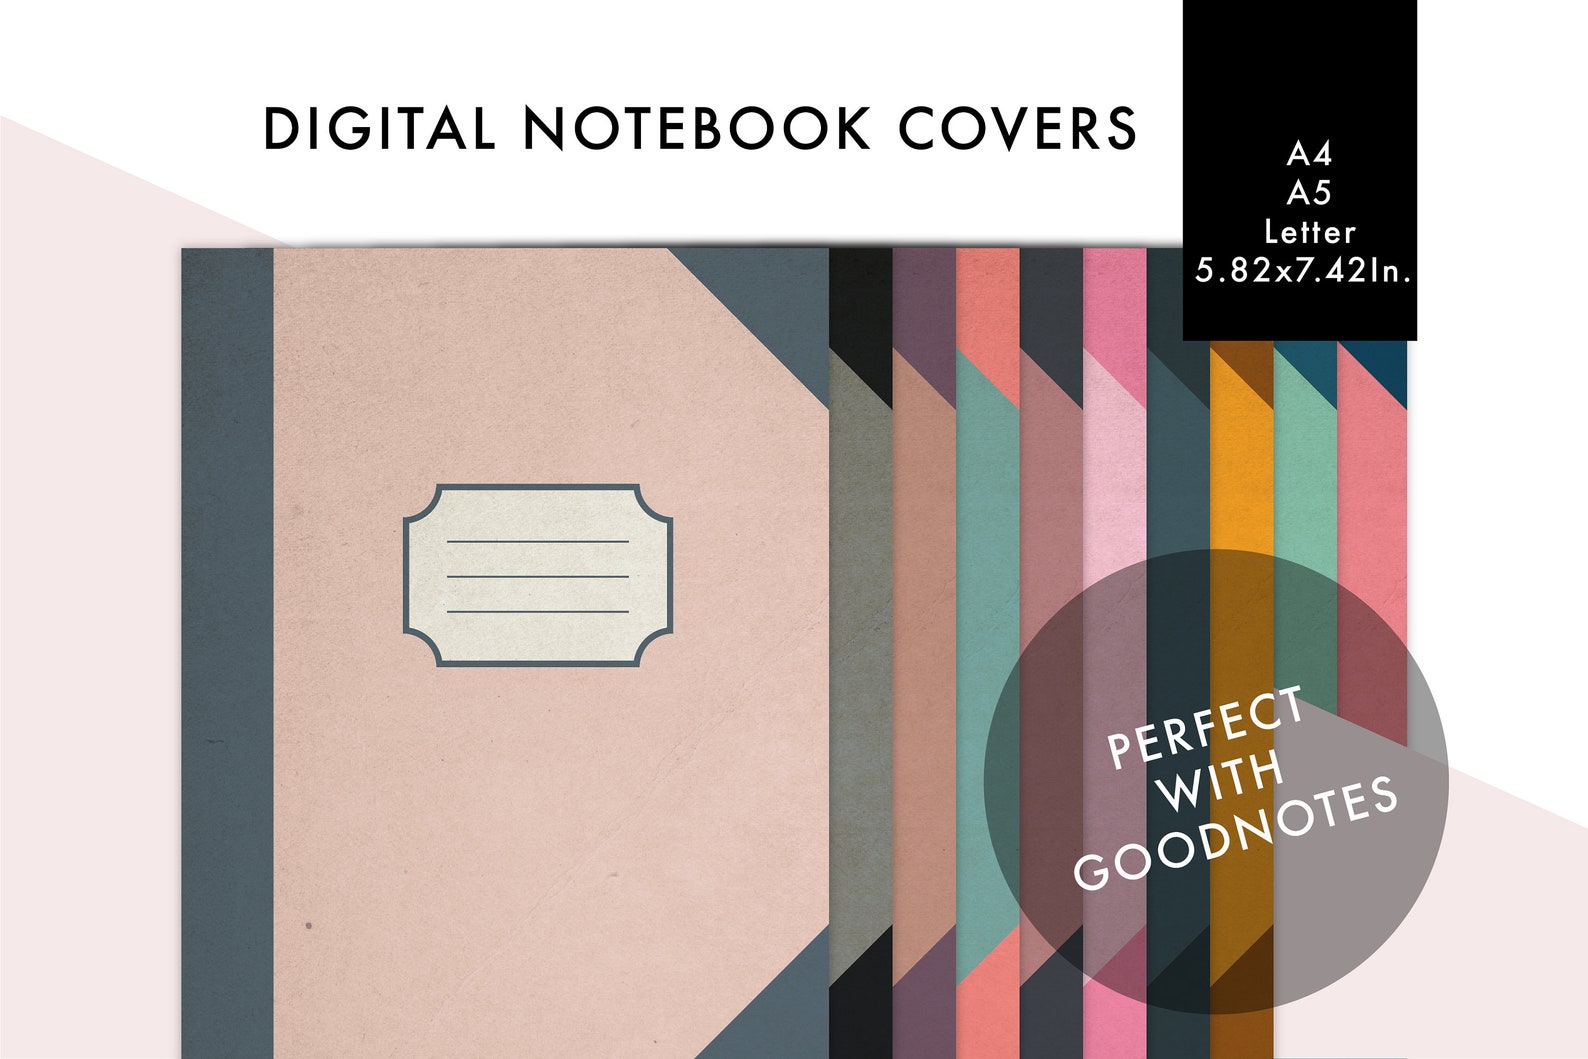 goodnotes covers